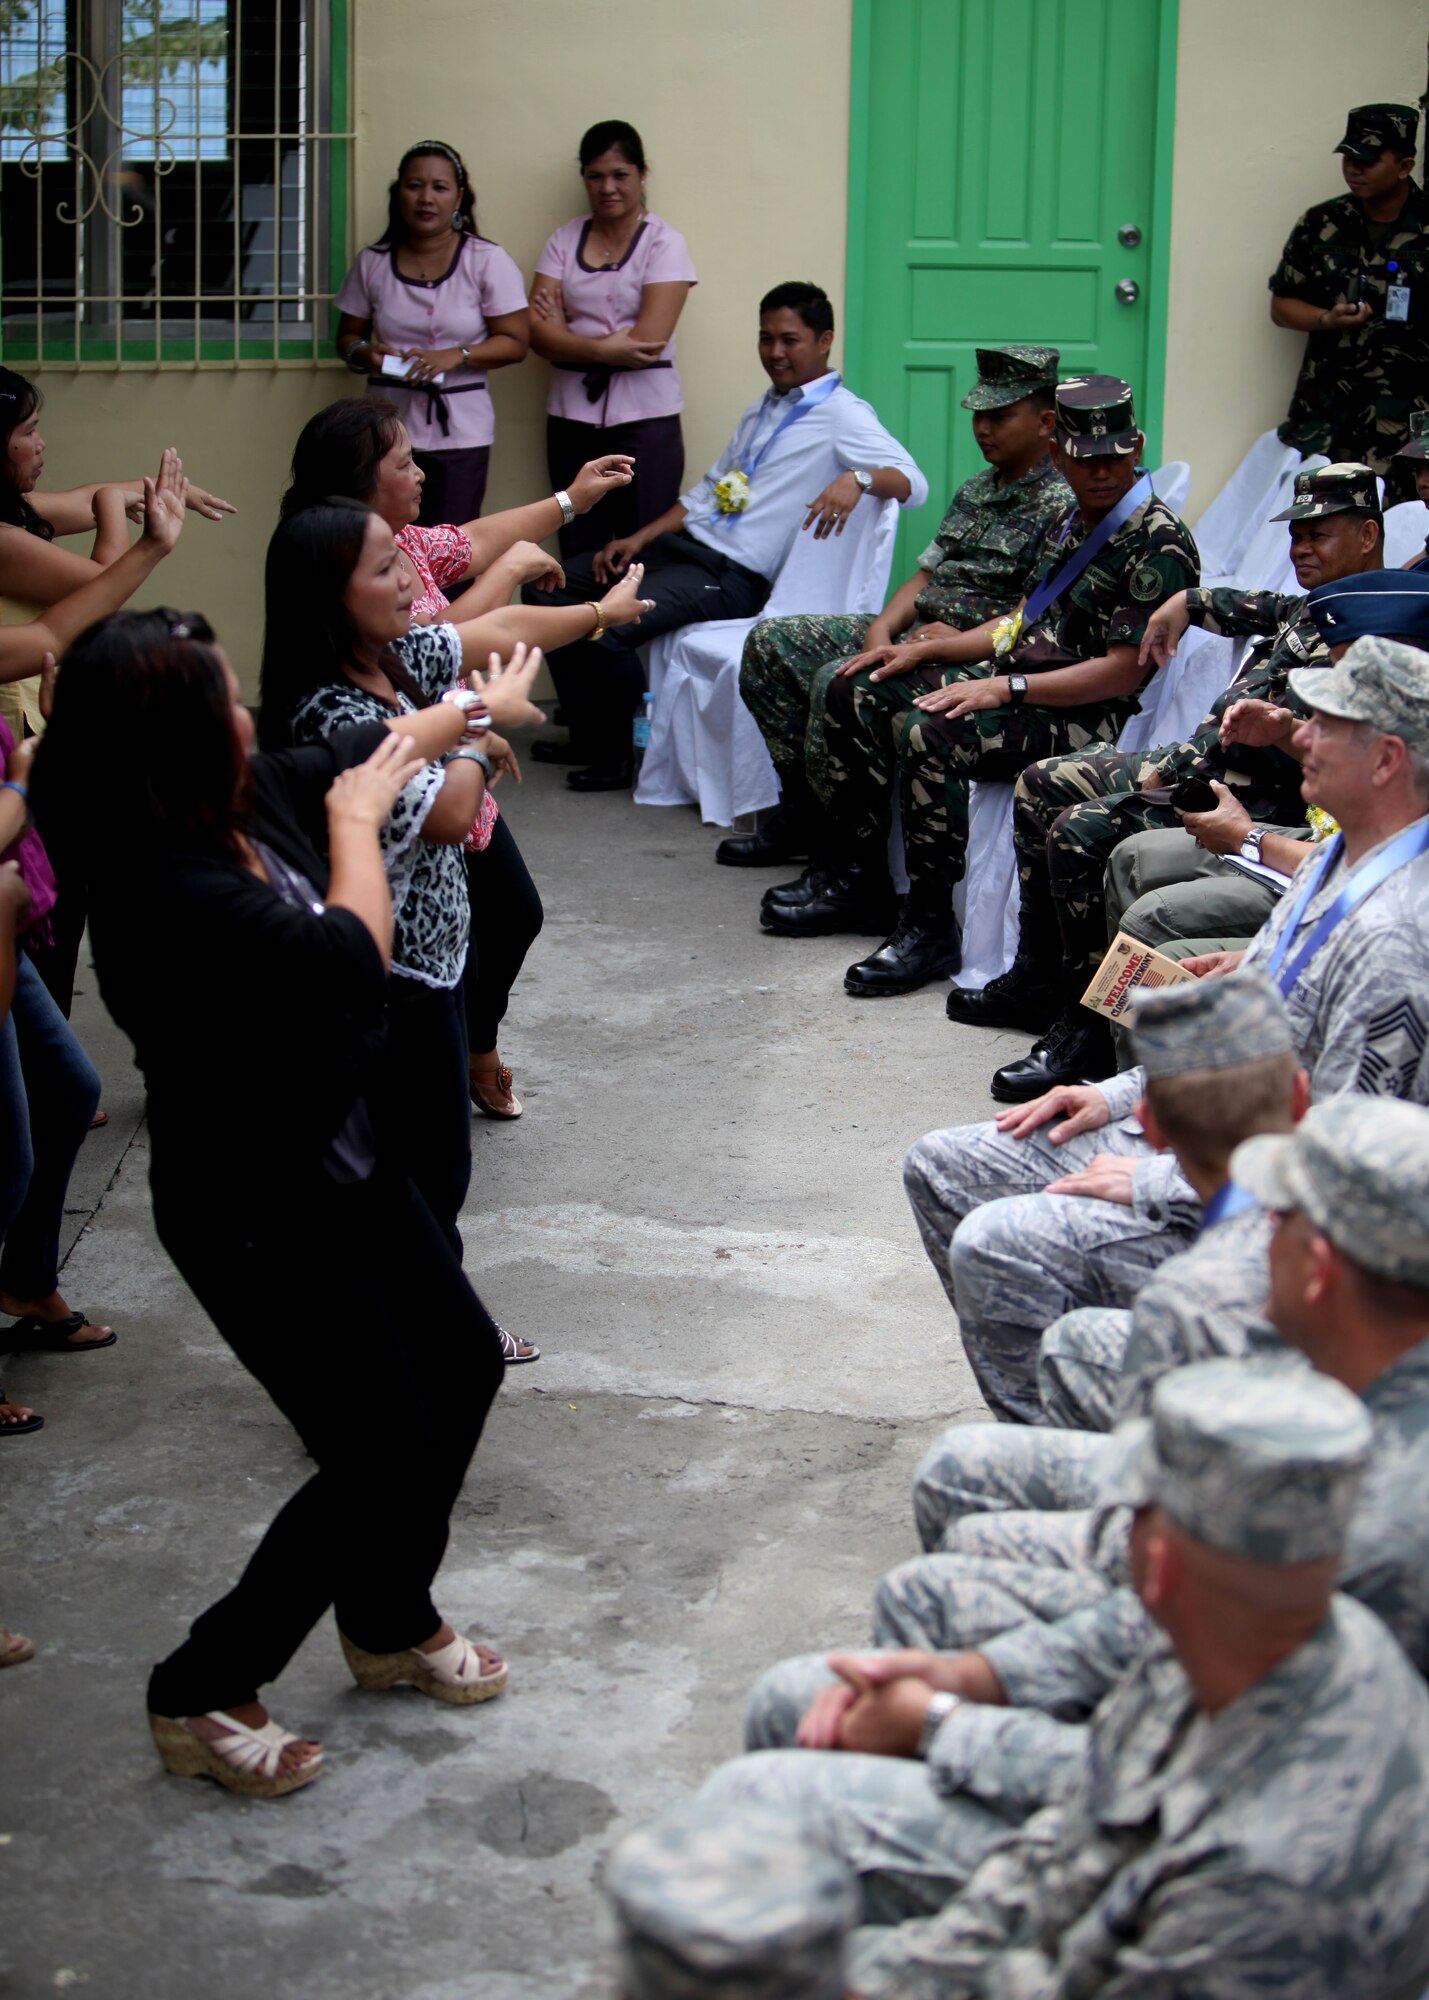 Filipino women show appreciation through dance
during a dedication ceremony at Clark Air Force Base,
Republic of the Philippines on September 20, 2012. U.S.
Air Force Civil Engineering Squad 647 out of Joint Base
Pearl Harbor teamed up with the Republic of the
Philippines Air Force to build an addition onto a local
schoolhouse before dedicating it to the community. The
U.S. military and Republic of the Philippines military
work together to strengthen interoperability between the
Philippine and U.S. government. (U.S. Marine Corps
photo by LCpl Katelyn Hunter/Released).